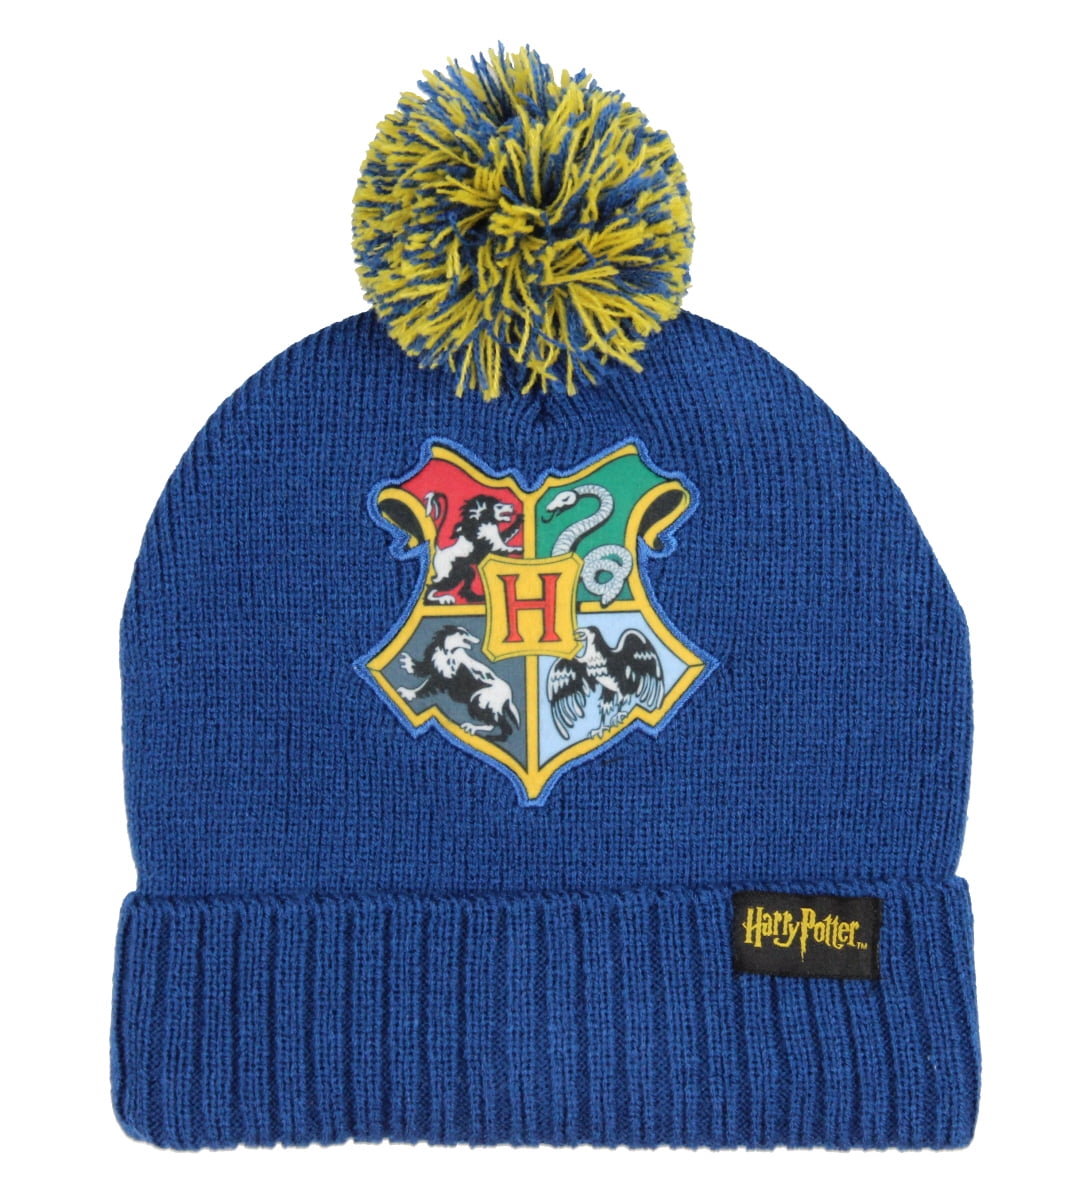 Harry Potter Hogwarts crest Winter Cuffed Hat Beanie Two Patterns ONE Size Adult 